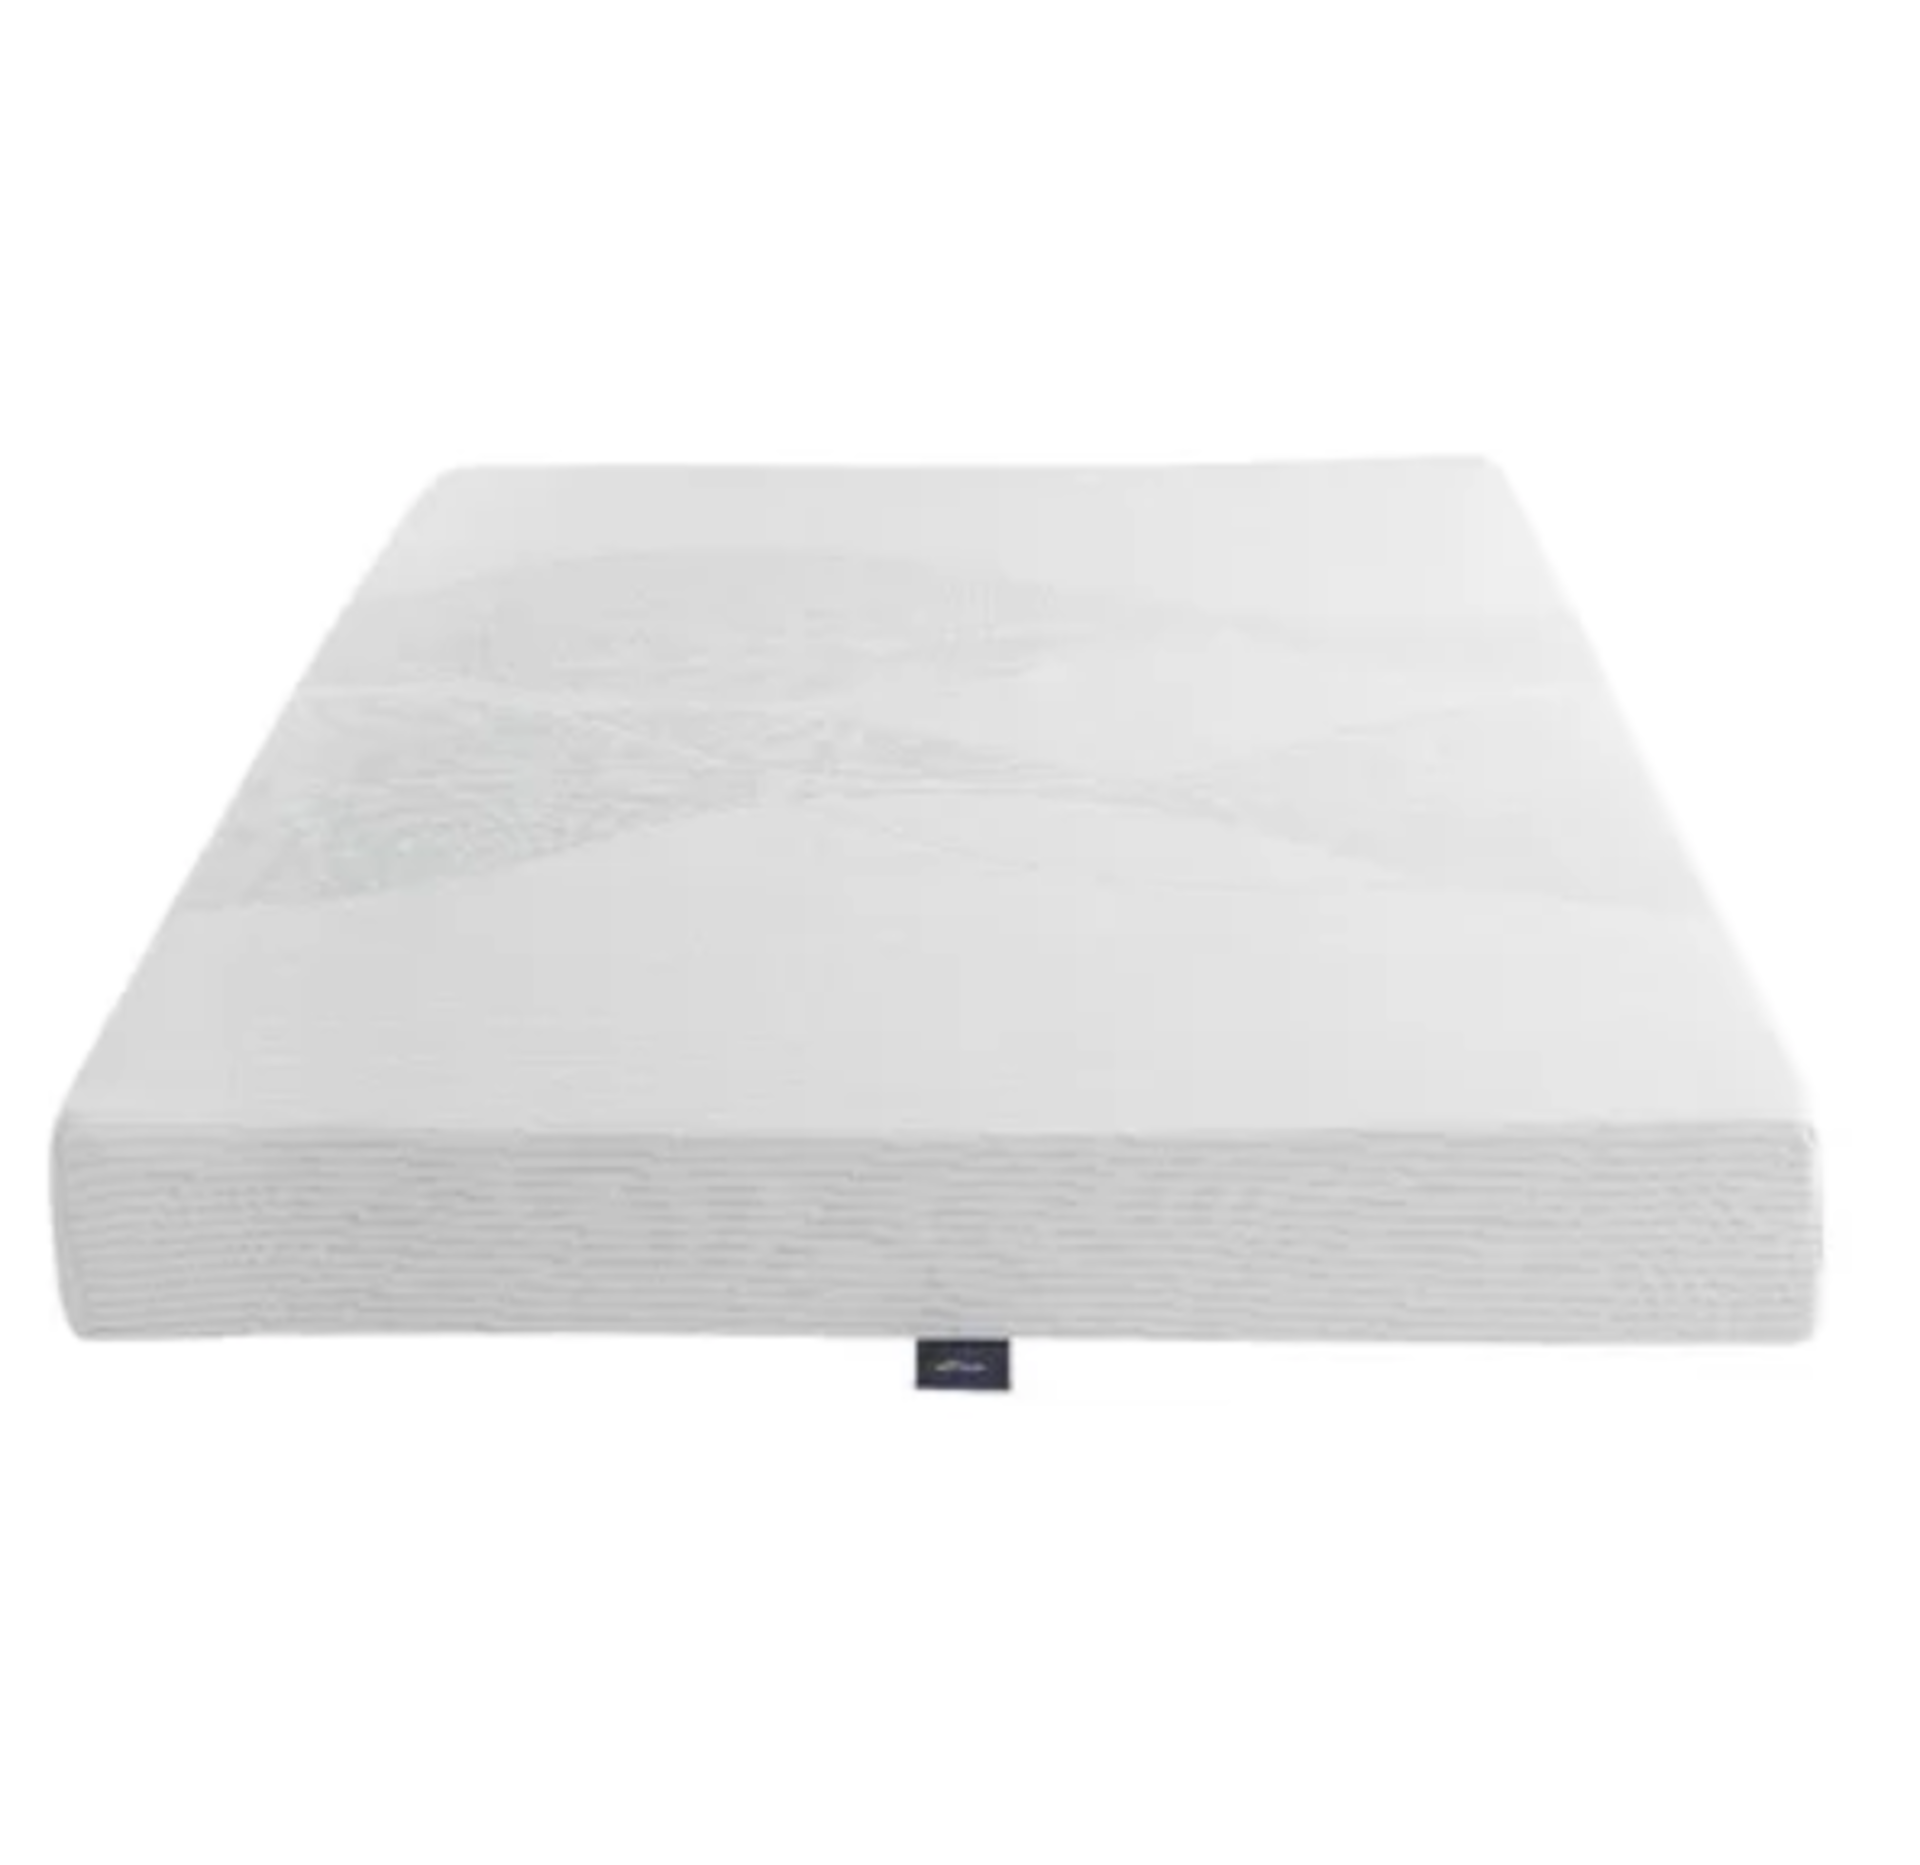 Silent Night 3-Zone Memory Foam Mattress. Double. The mattress contains a comfort layer of body